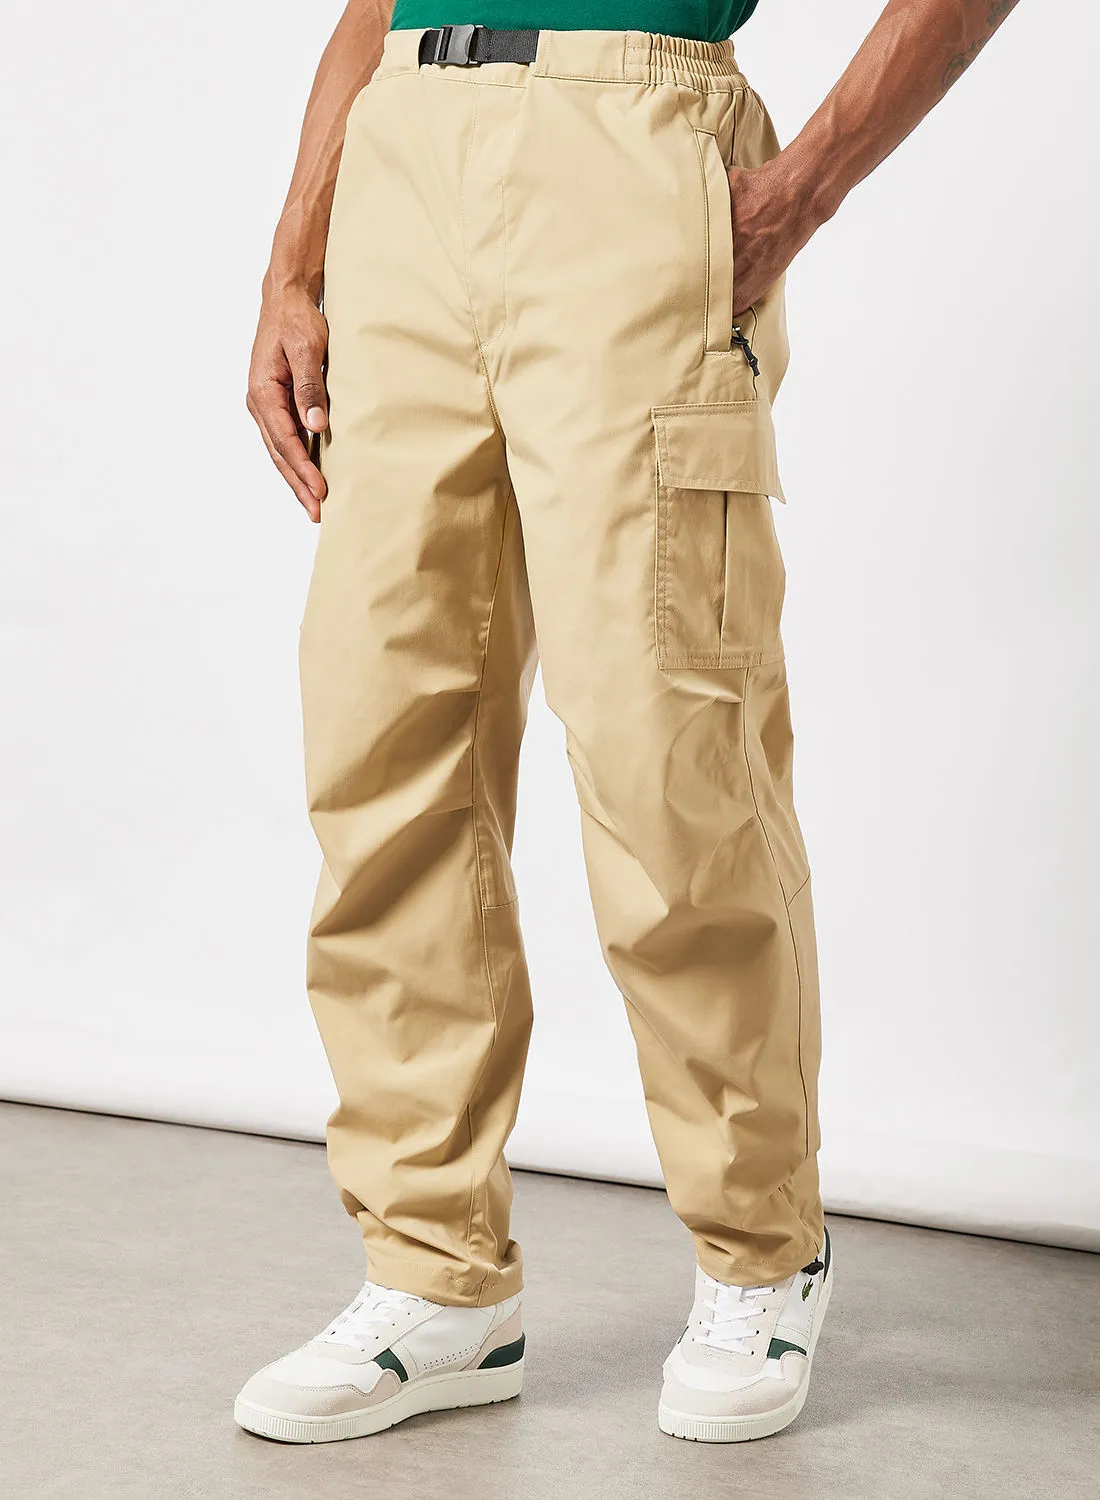 LACOSTE Utility Relaxed Fit Cargo Pants